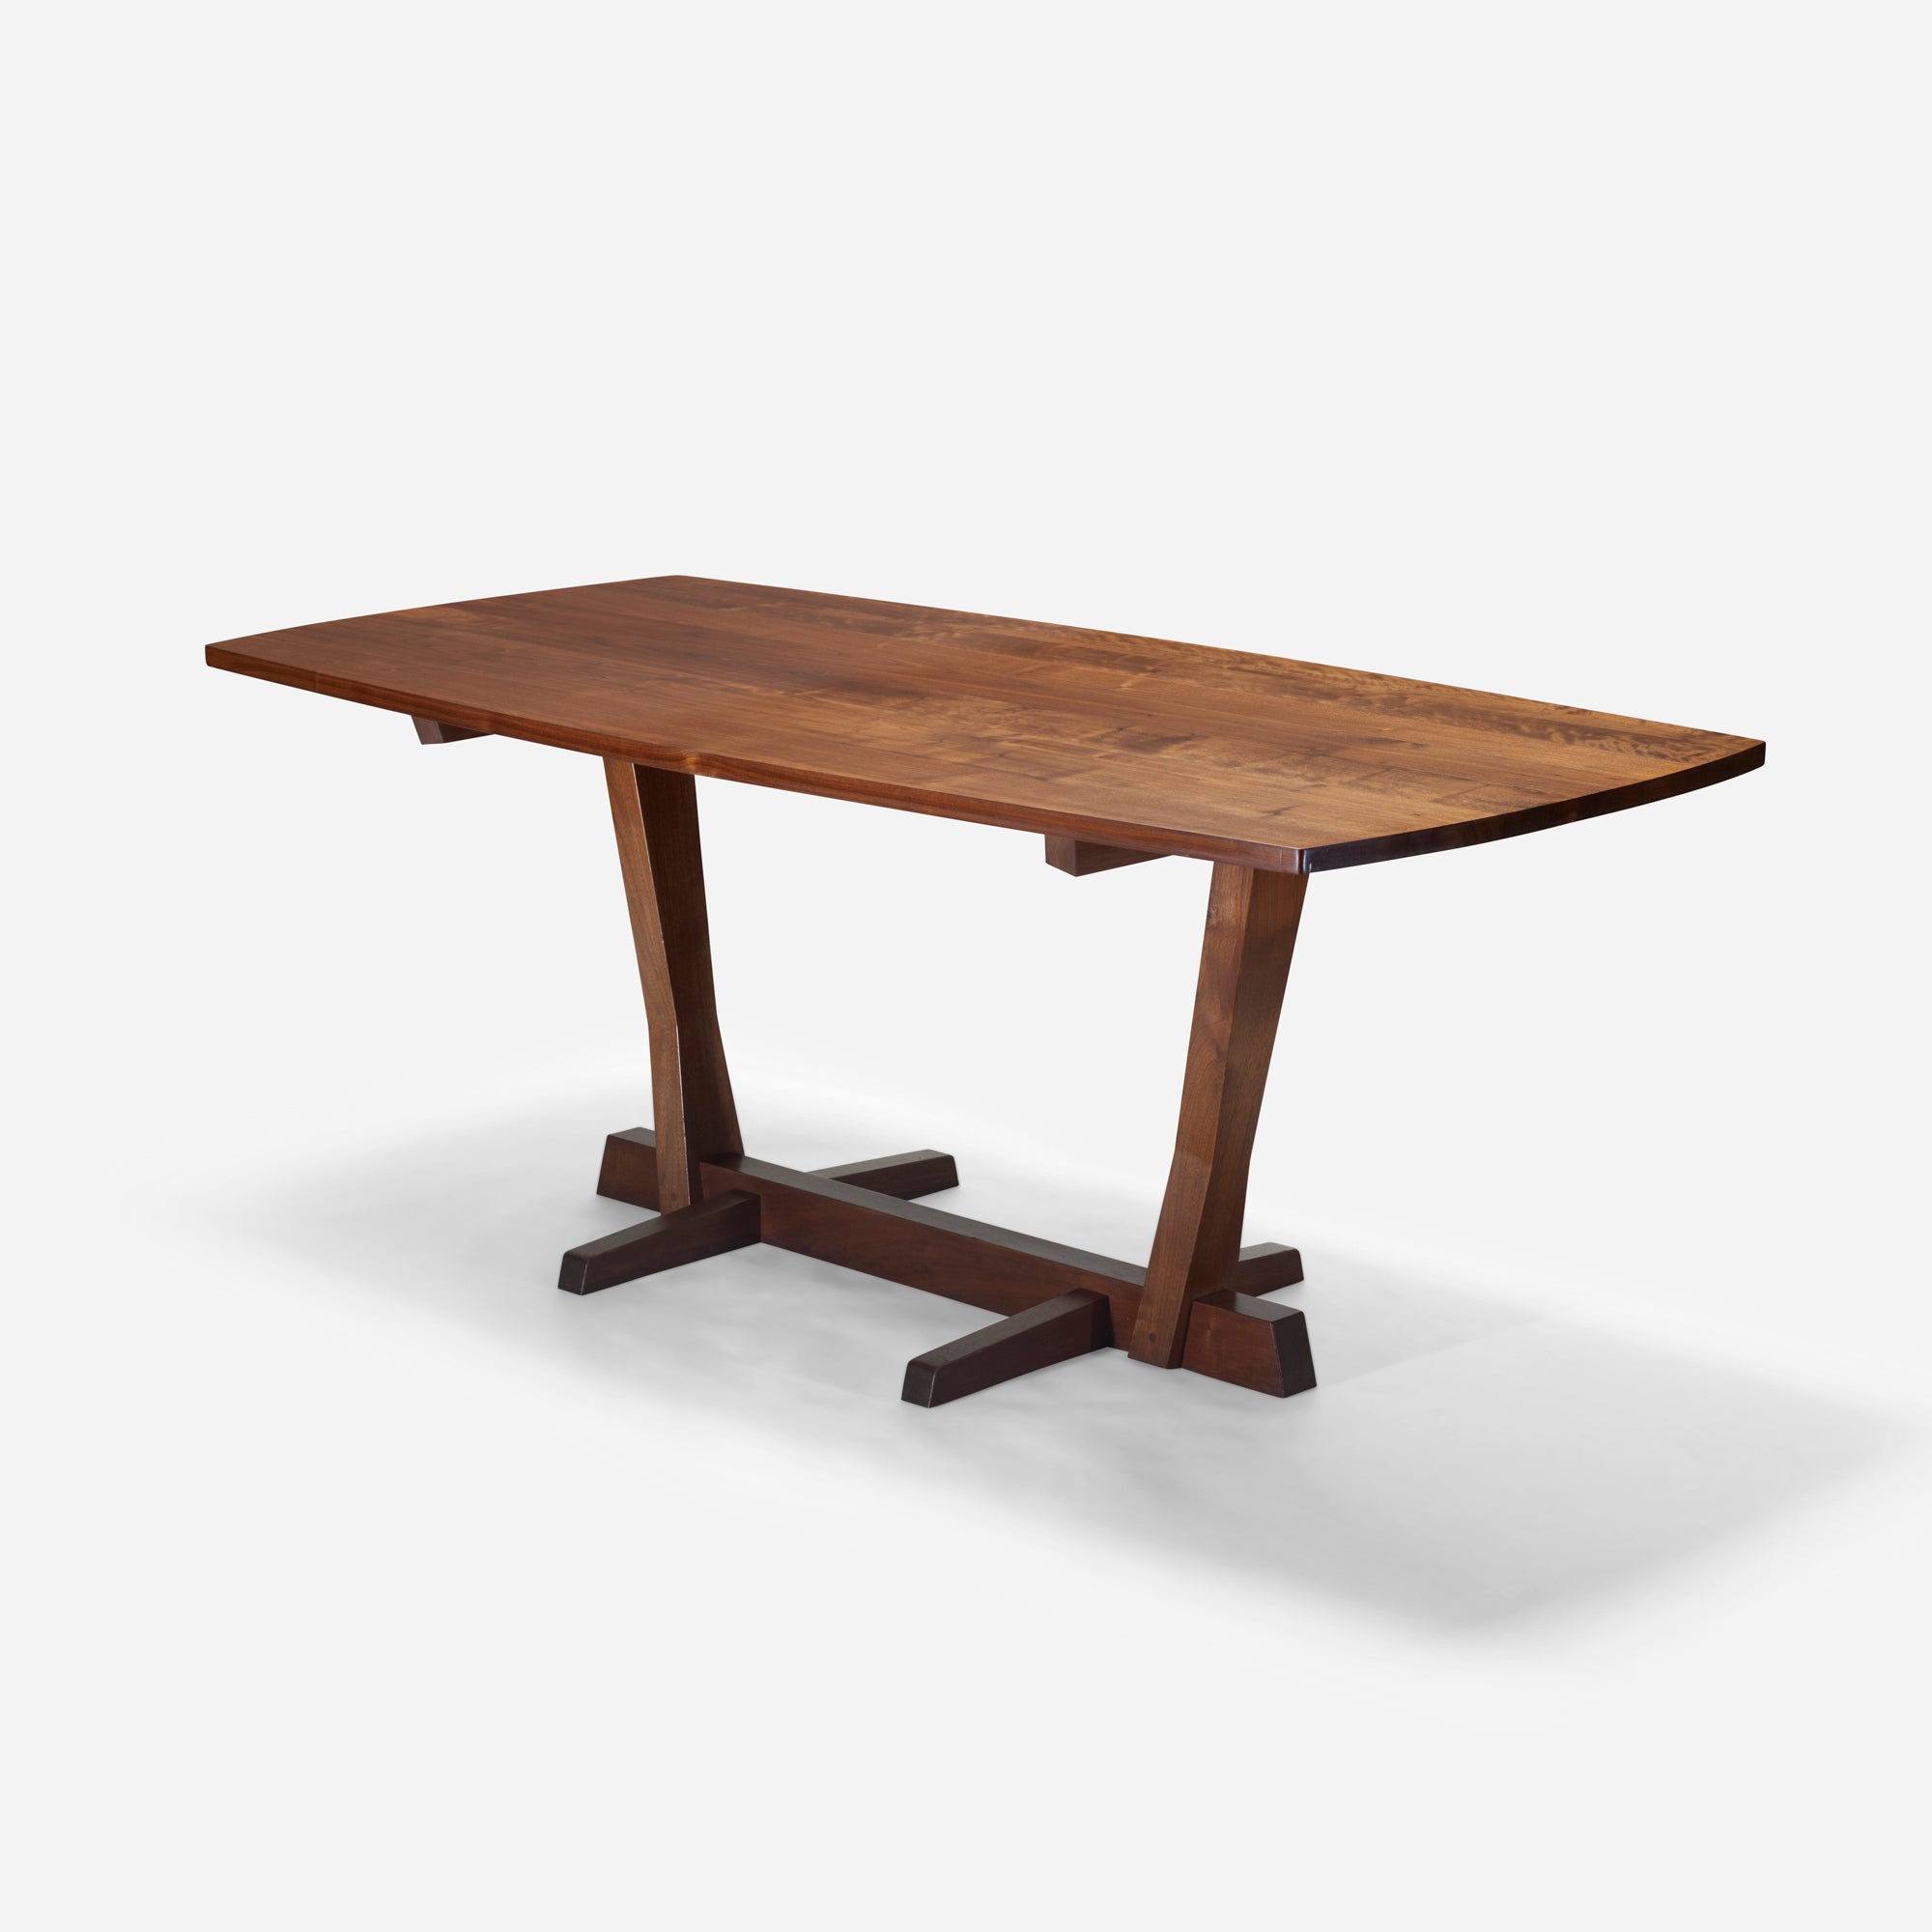 Conoid dining table by George Nakashima